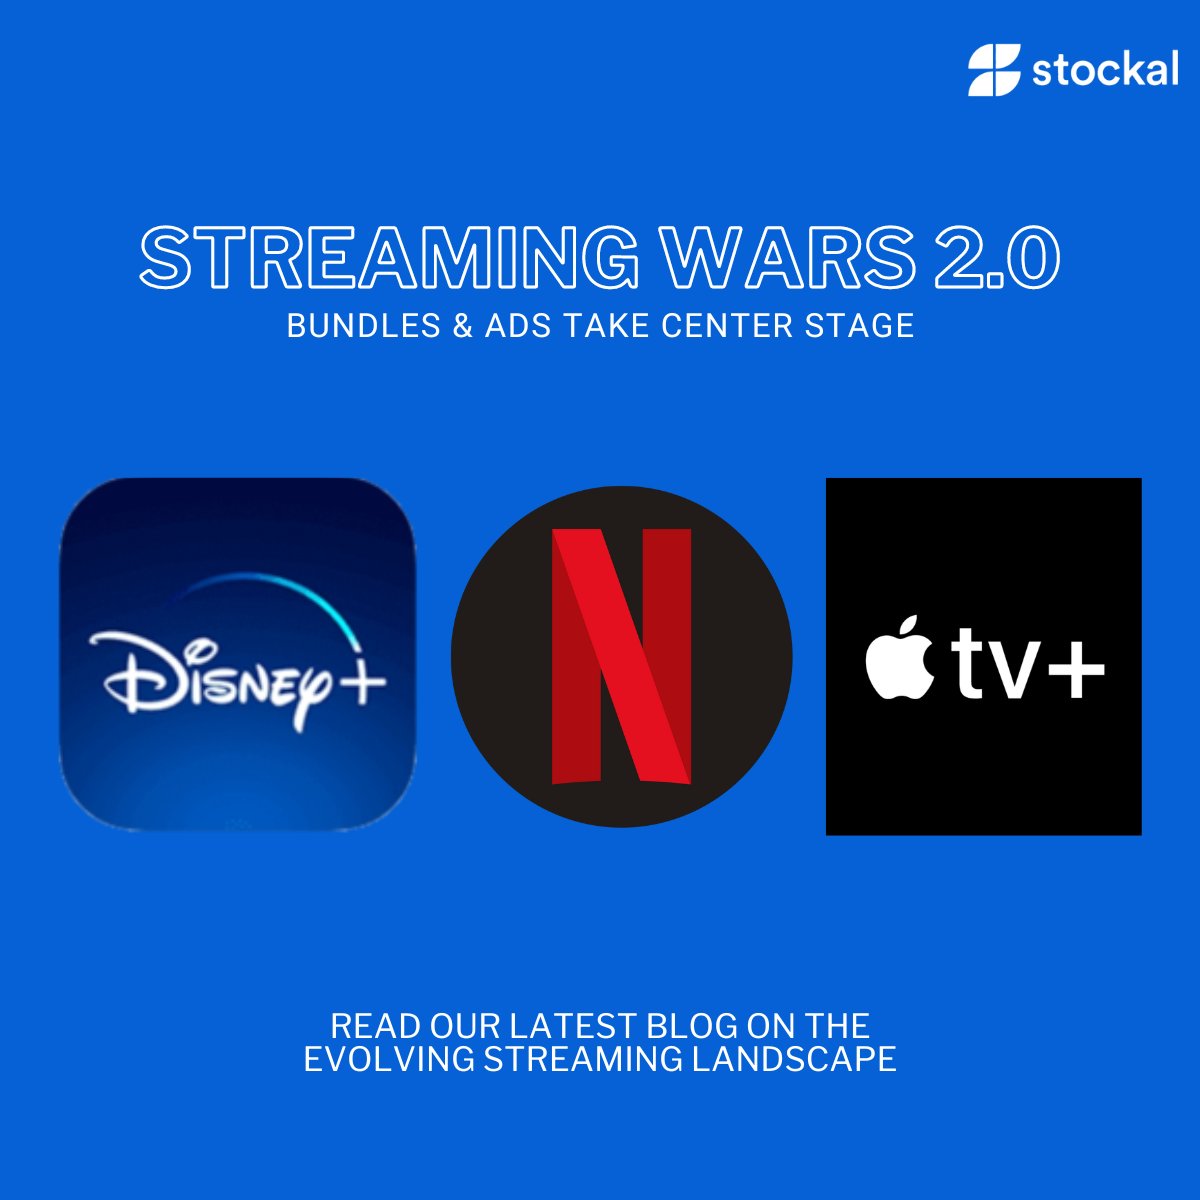 Streaming wars 2.0: Bundles & ads are the new battleground! $NFLX thrives with ad tier, $AAPL eyes ads & sports, $DIS buys Hulu & bundles content. Who will win? Read our latest blog here: stockal.com/blogs/the-grea… #GetStockal #GlobalInvesting